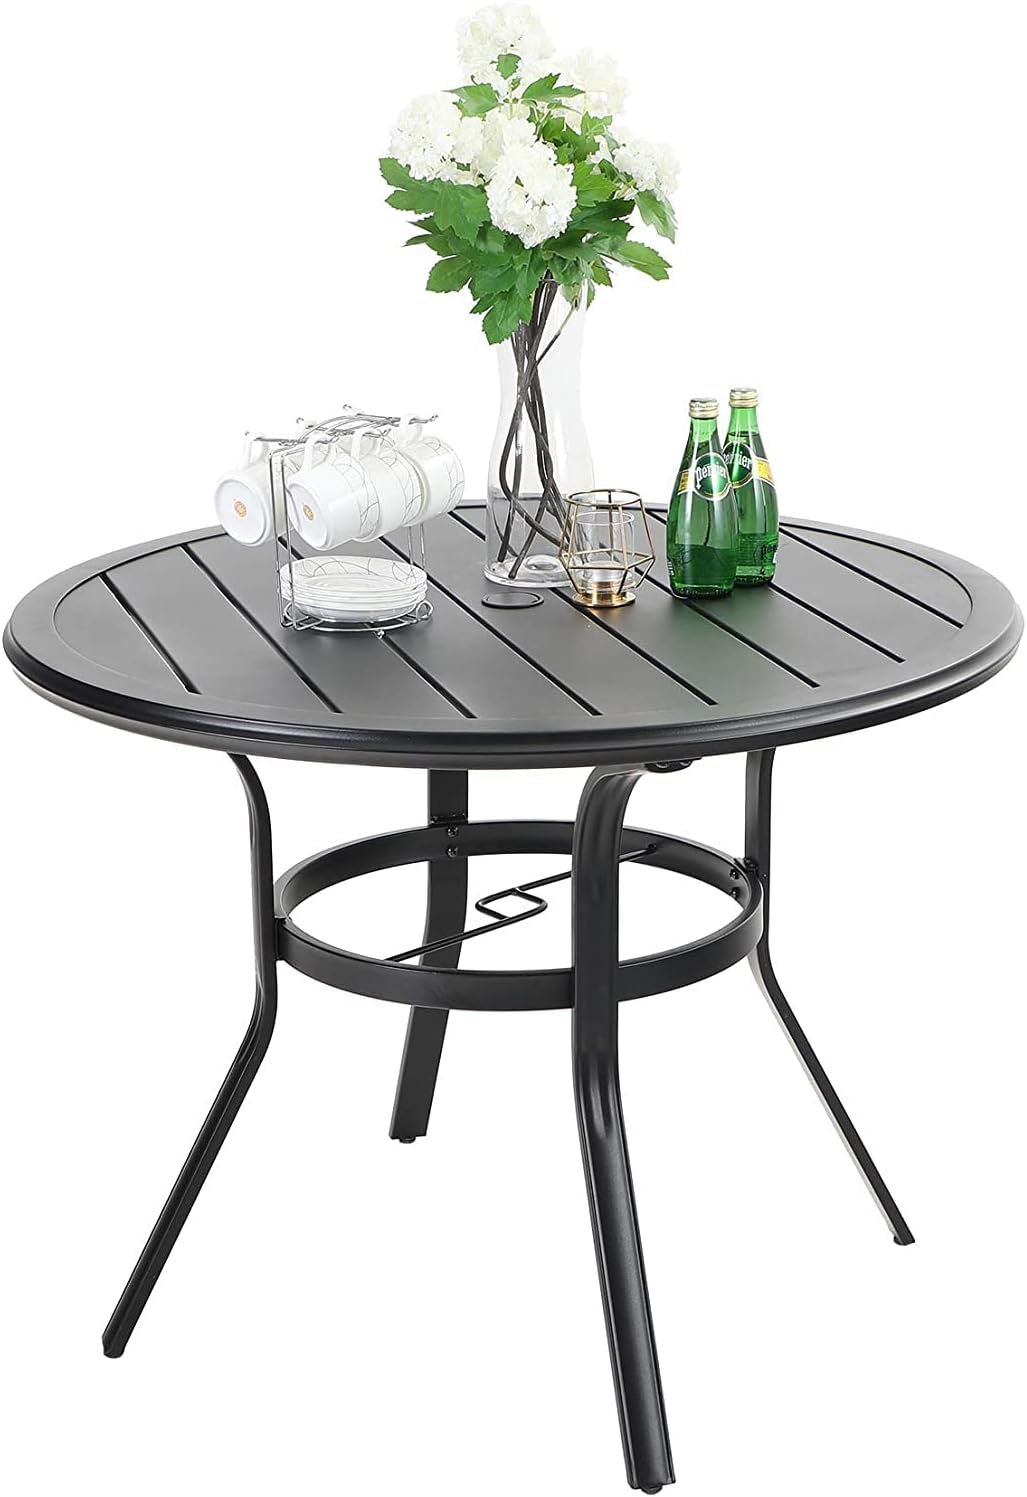 MFSTUDIO 38 Outdoor Dining Table with Adjustable mbrella Hole, Patio Metal All-Weather Round Table for Backyard Lawn Garden